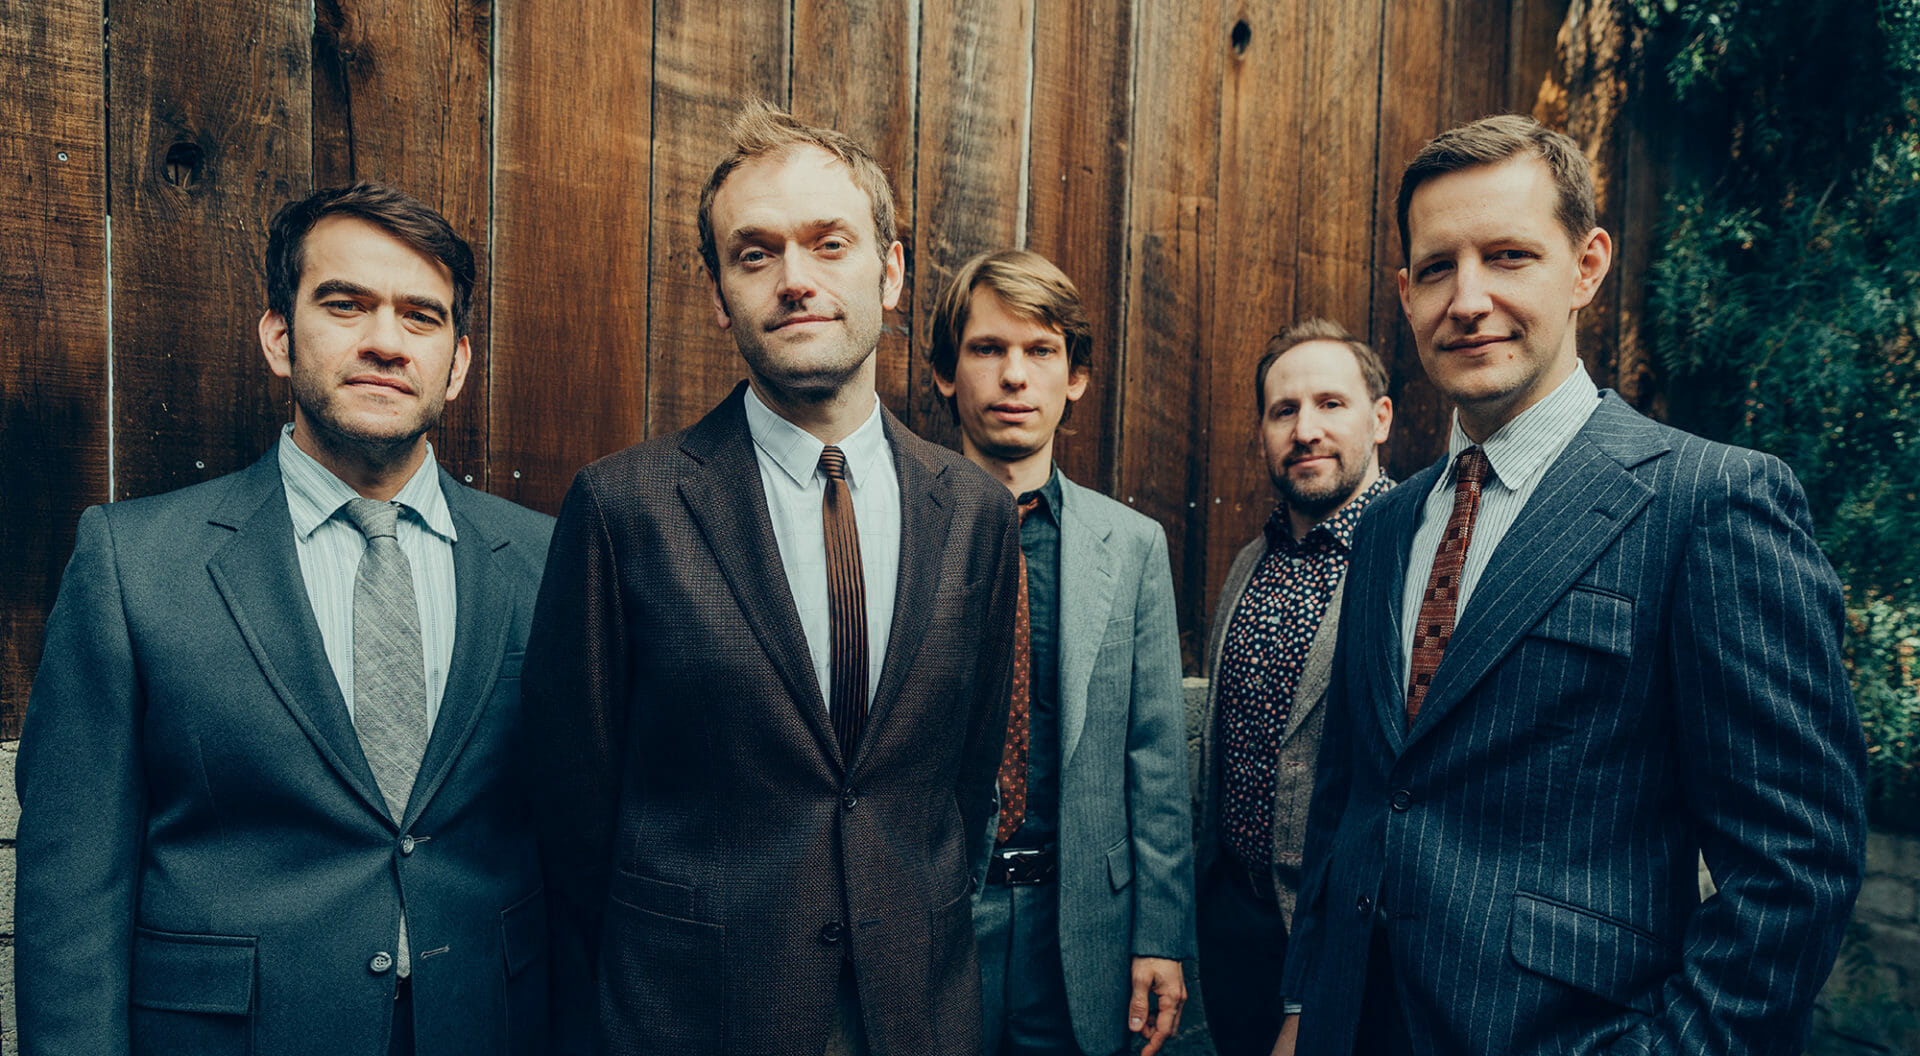 Track By Track: Punch Brothers Reimagine Tony Rice’s ‘Church Street Blues’ with ‘Hell on Church Street’